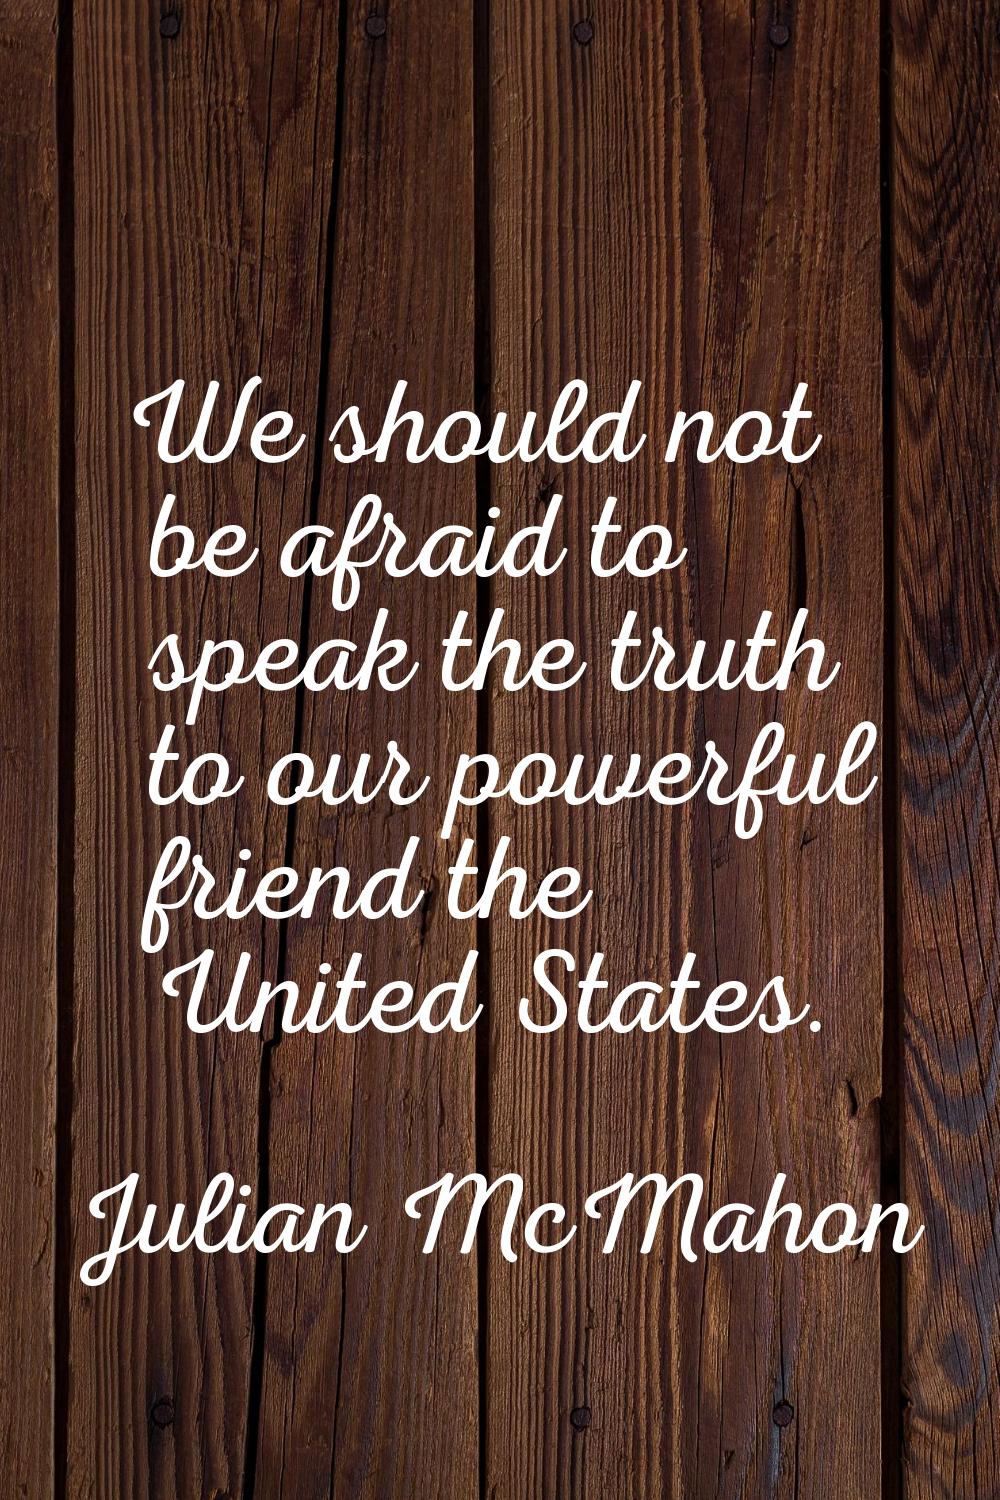 We should not be afraid to speak the truth to our powerful friend the United States.